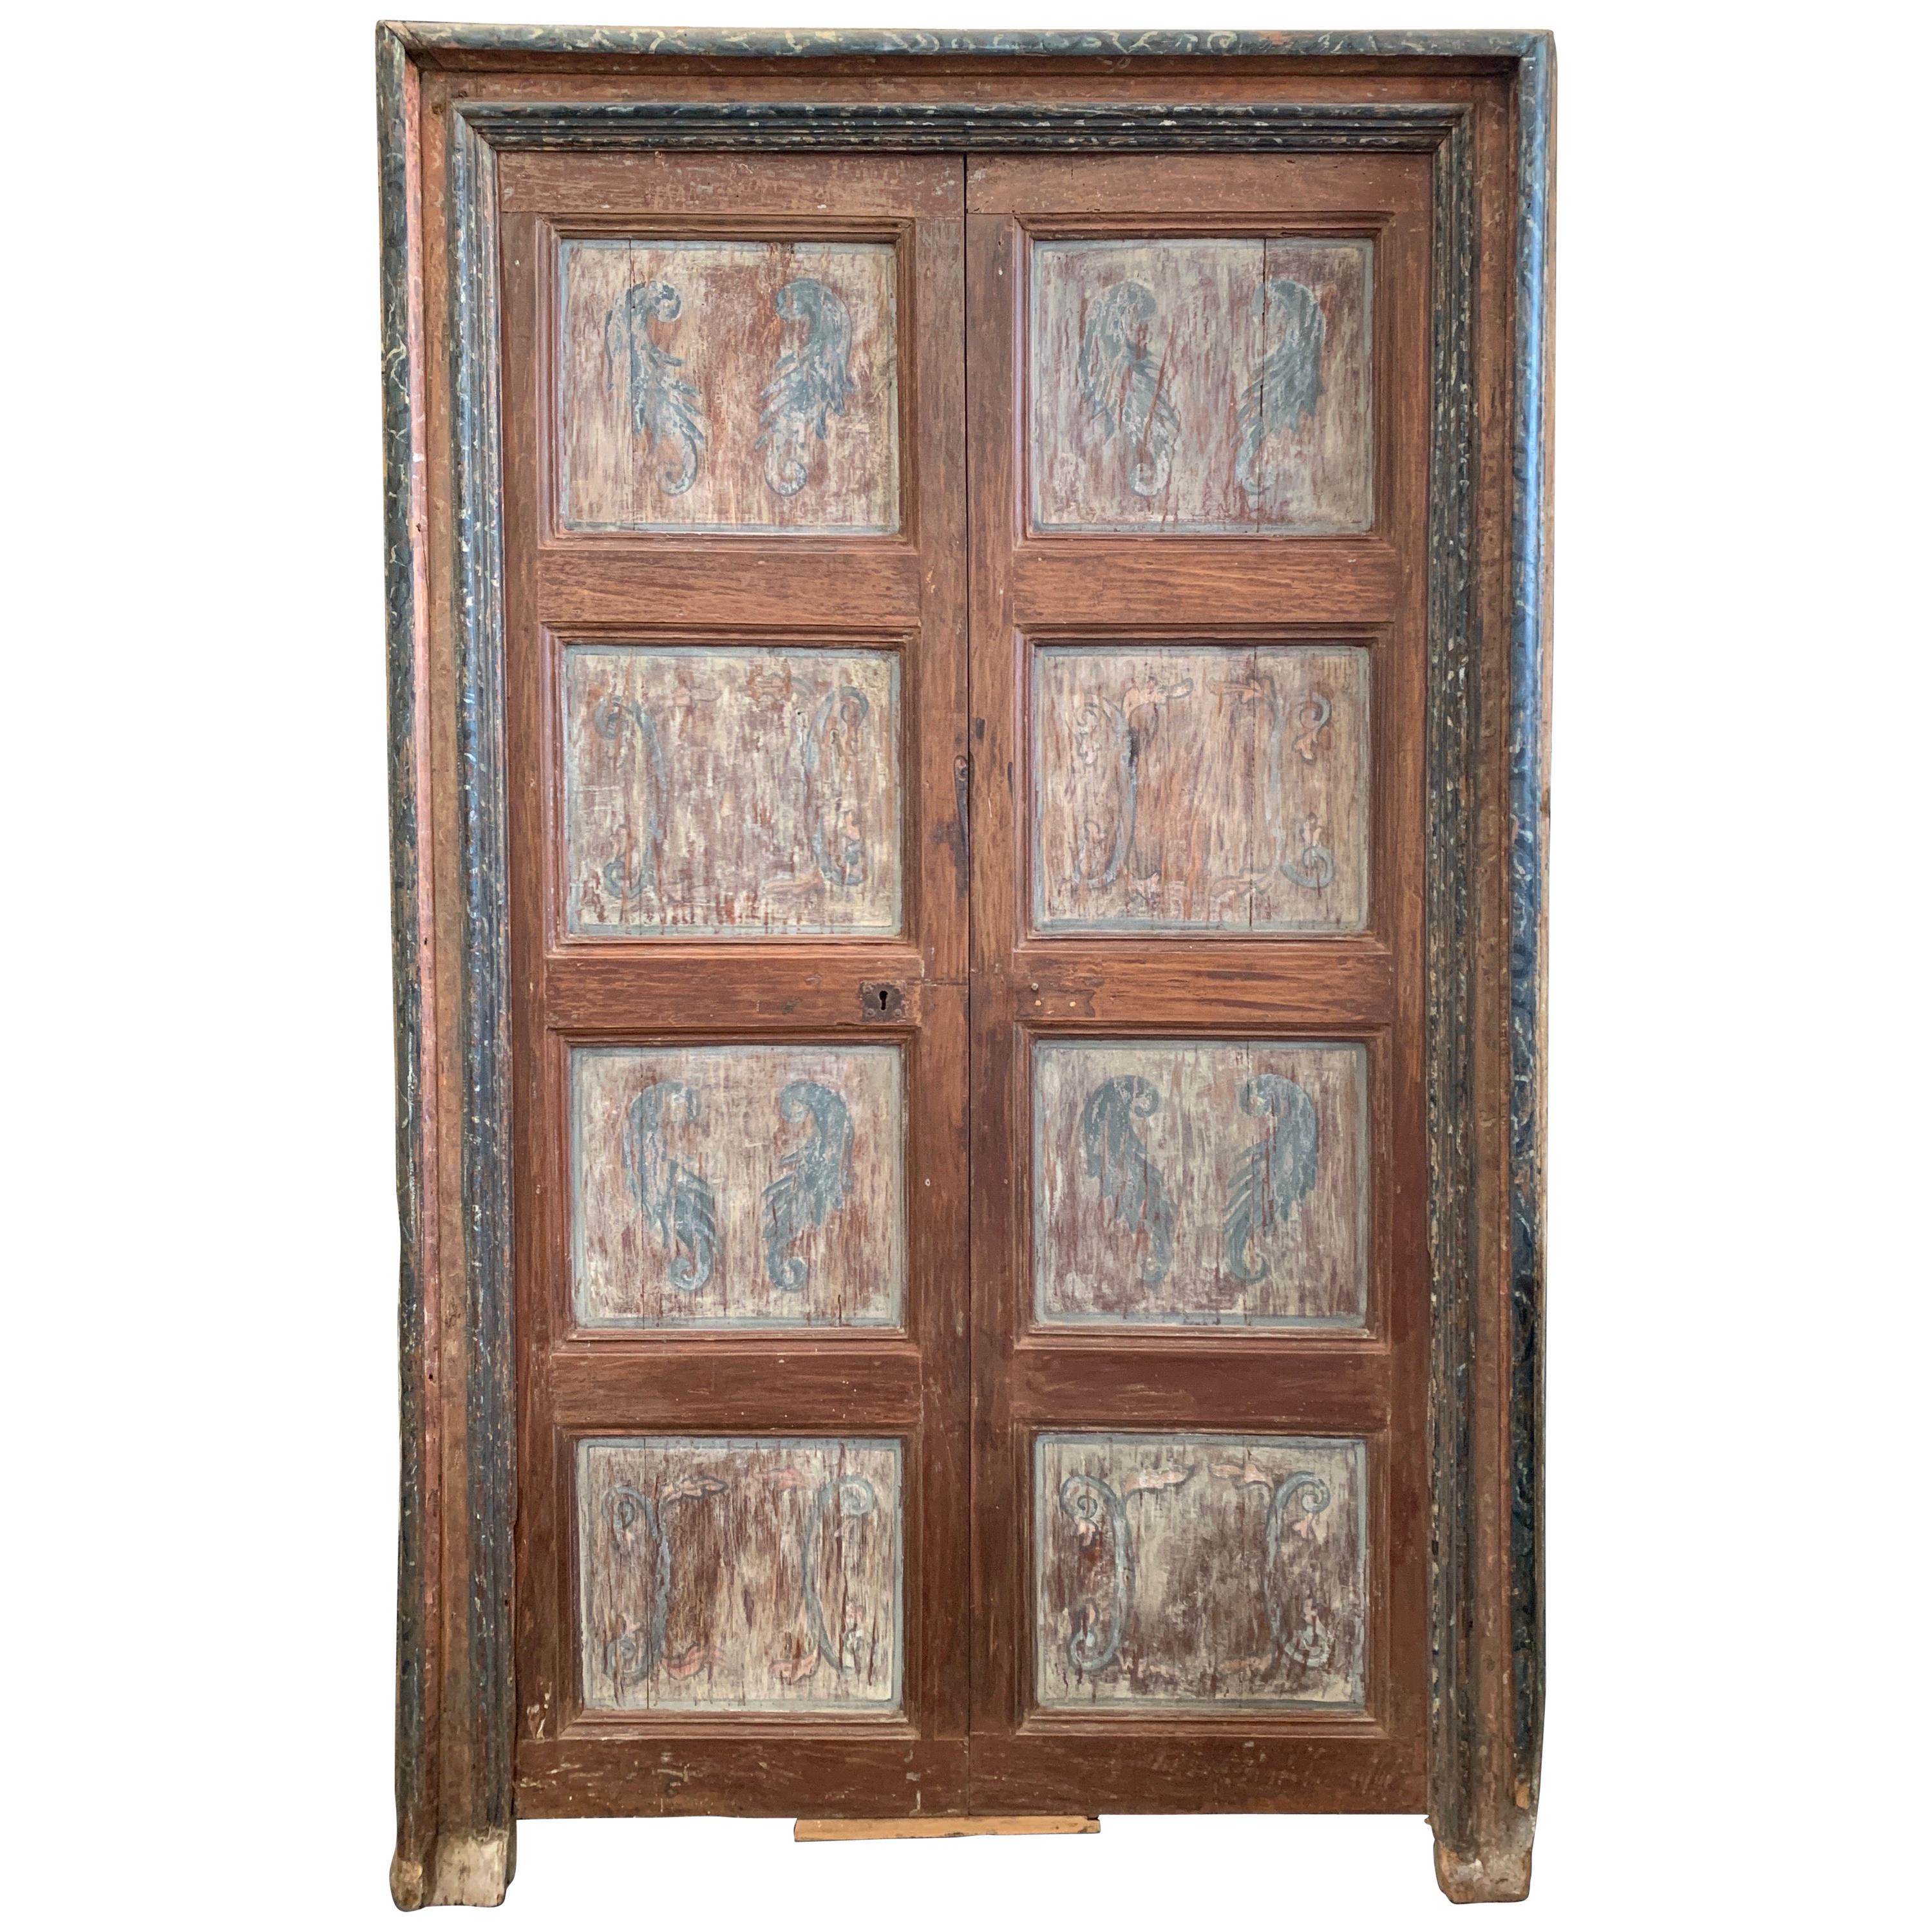 Spanish 18th Century Doors with Polychromed Painted Surround with Blue For Sale